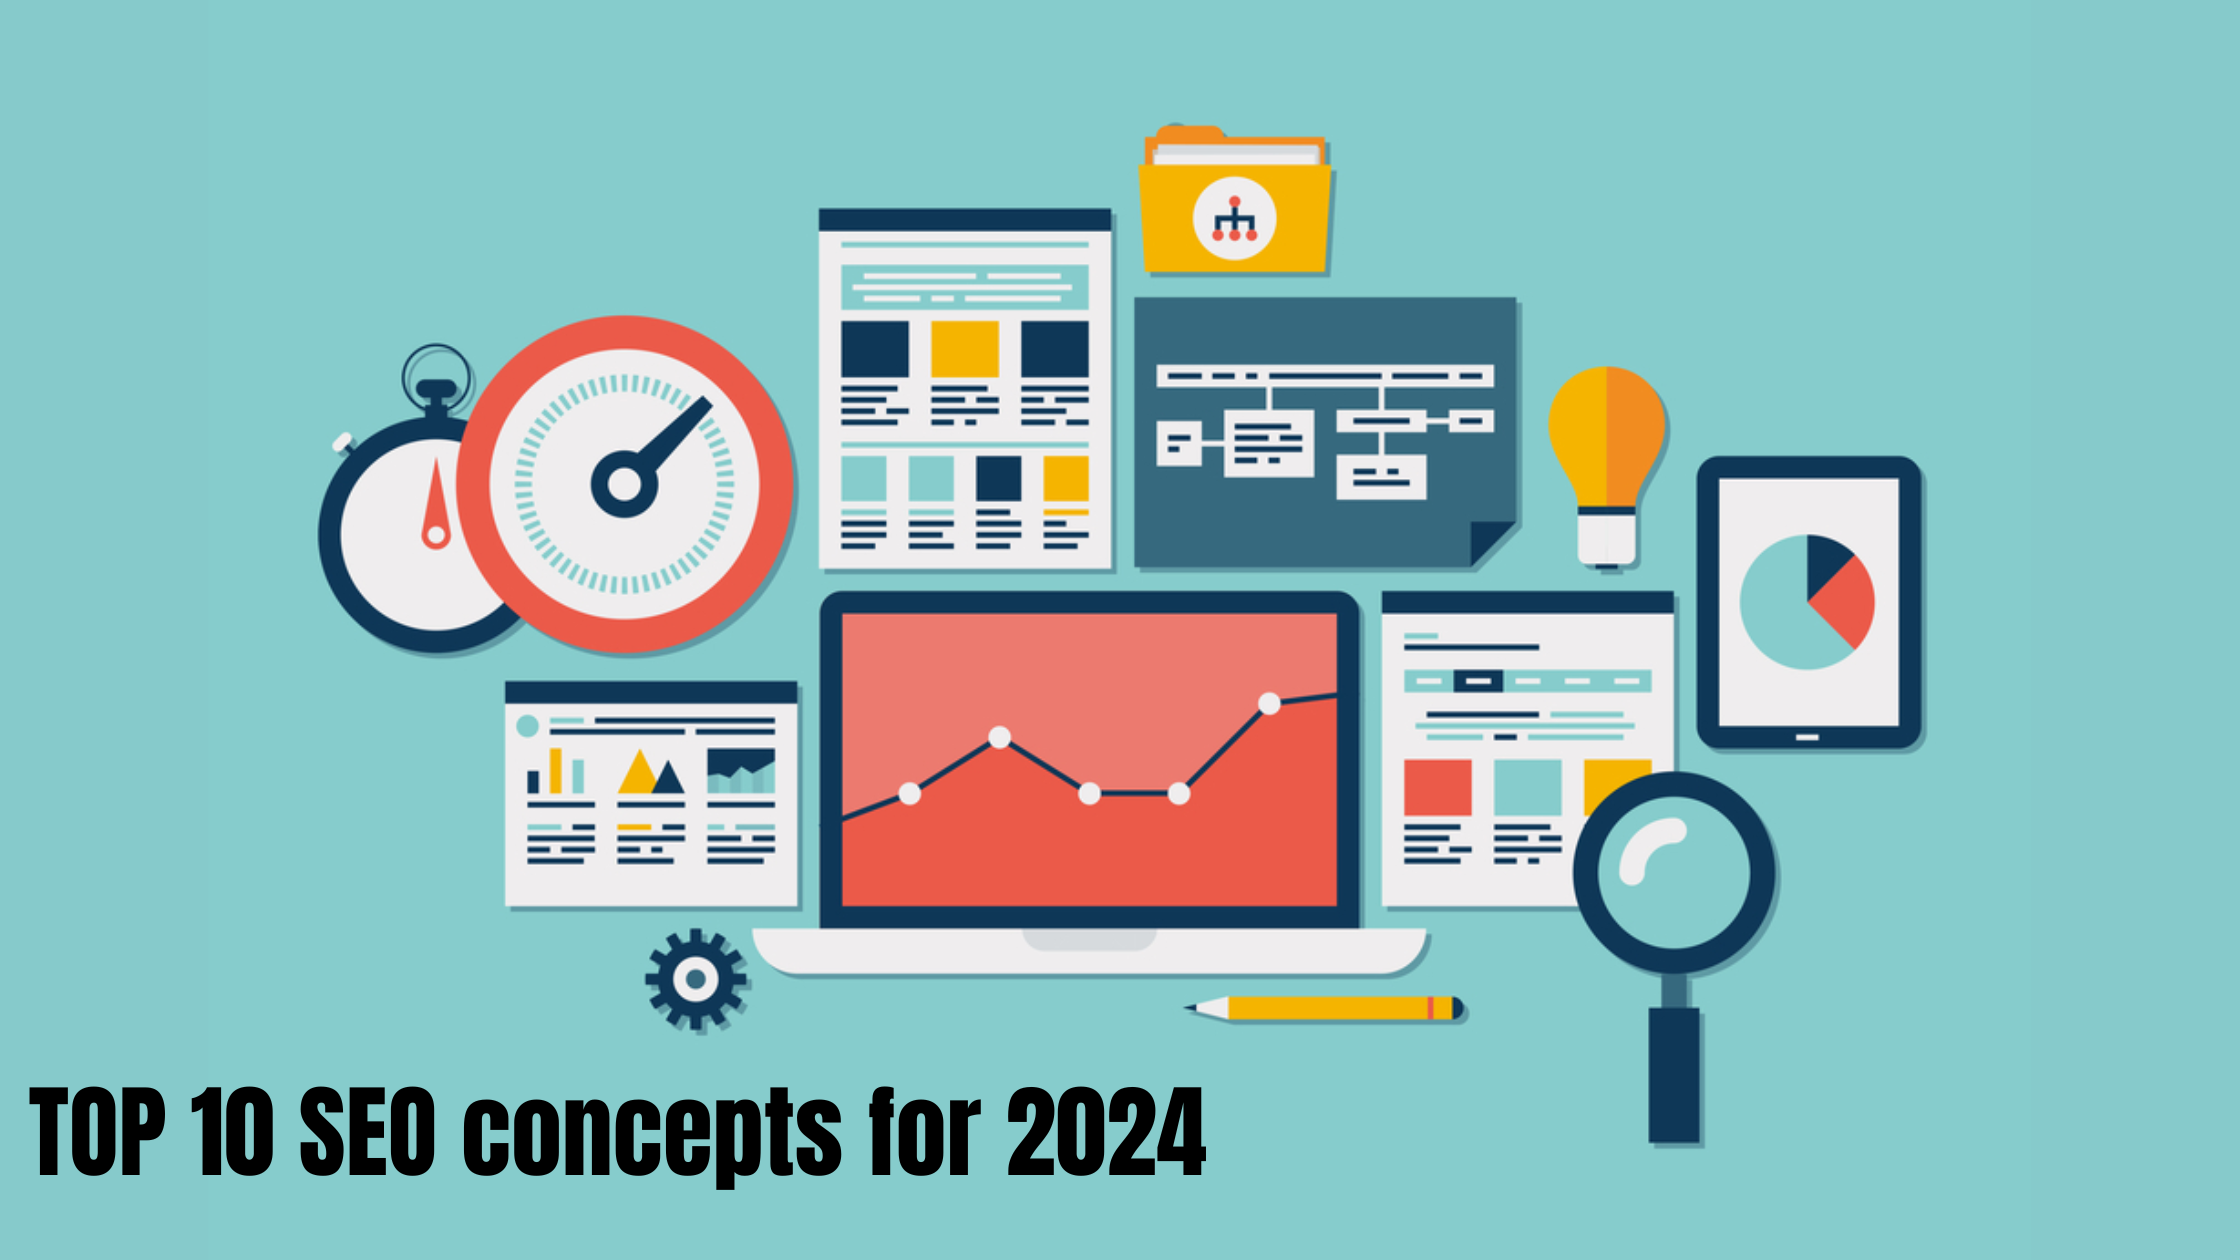 TOP 10 SEO concepts for 2024